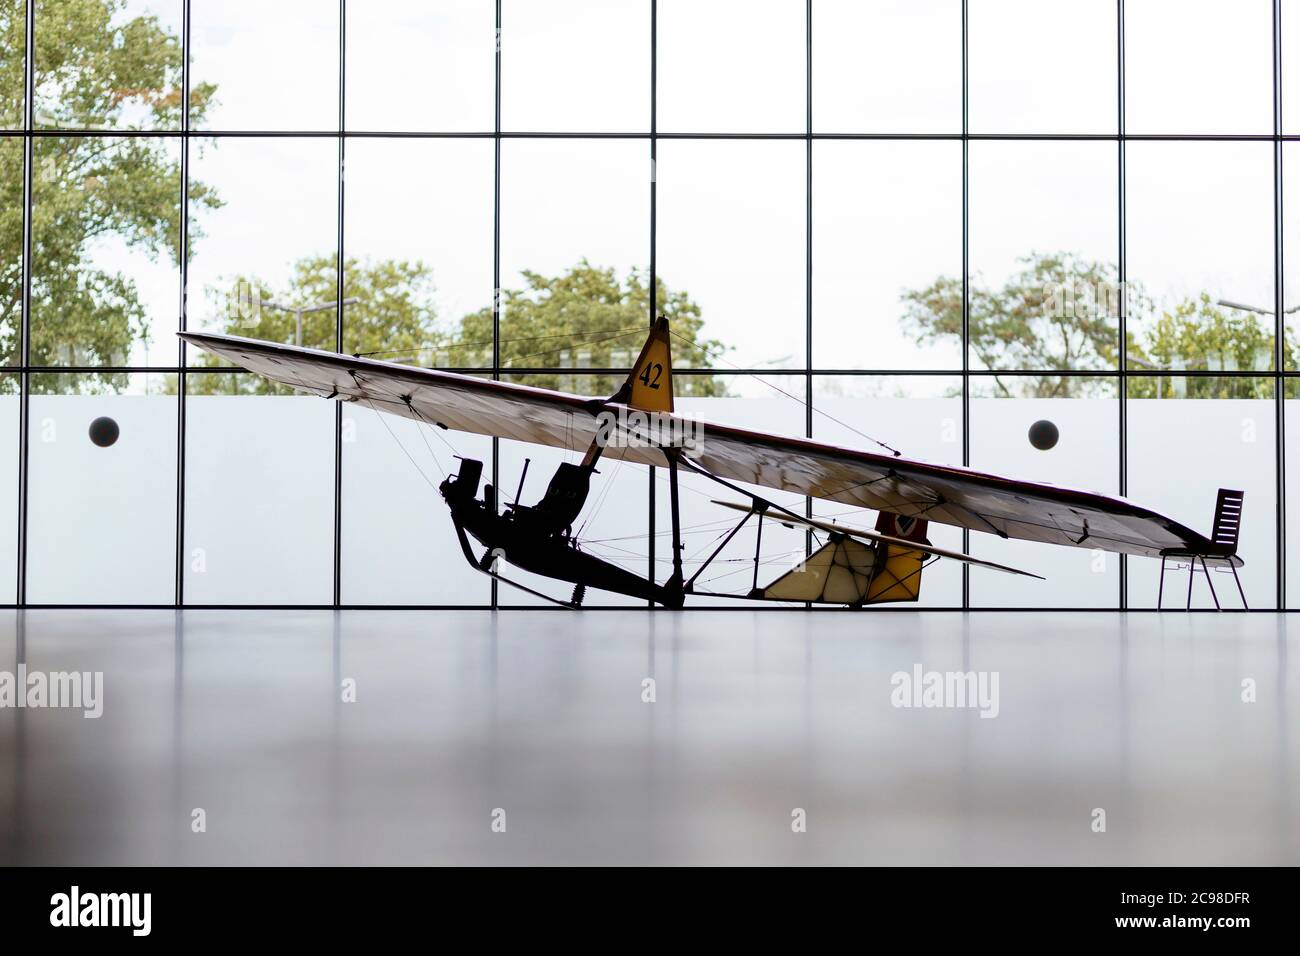 A SG 38 school glider, the most built aircraft for solo flight training in the 1940s, at Motorworld Koln Rheinland. Cologne, 07/27/2020 | usage worldwide Stock Photo